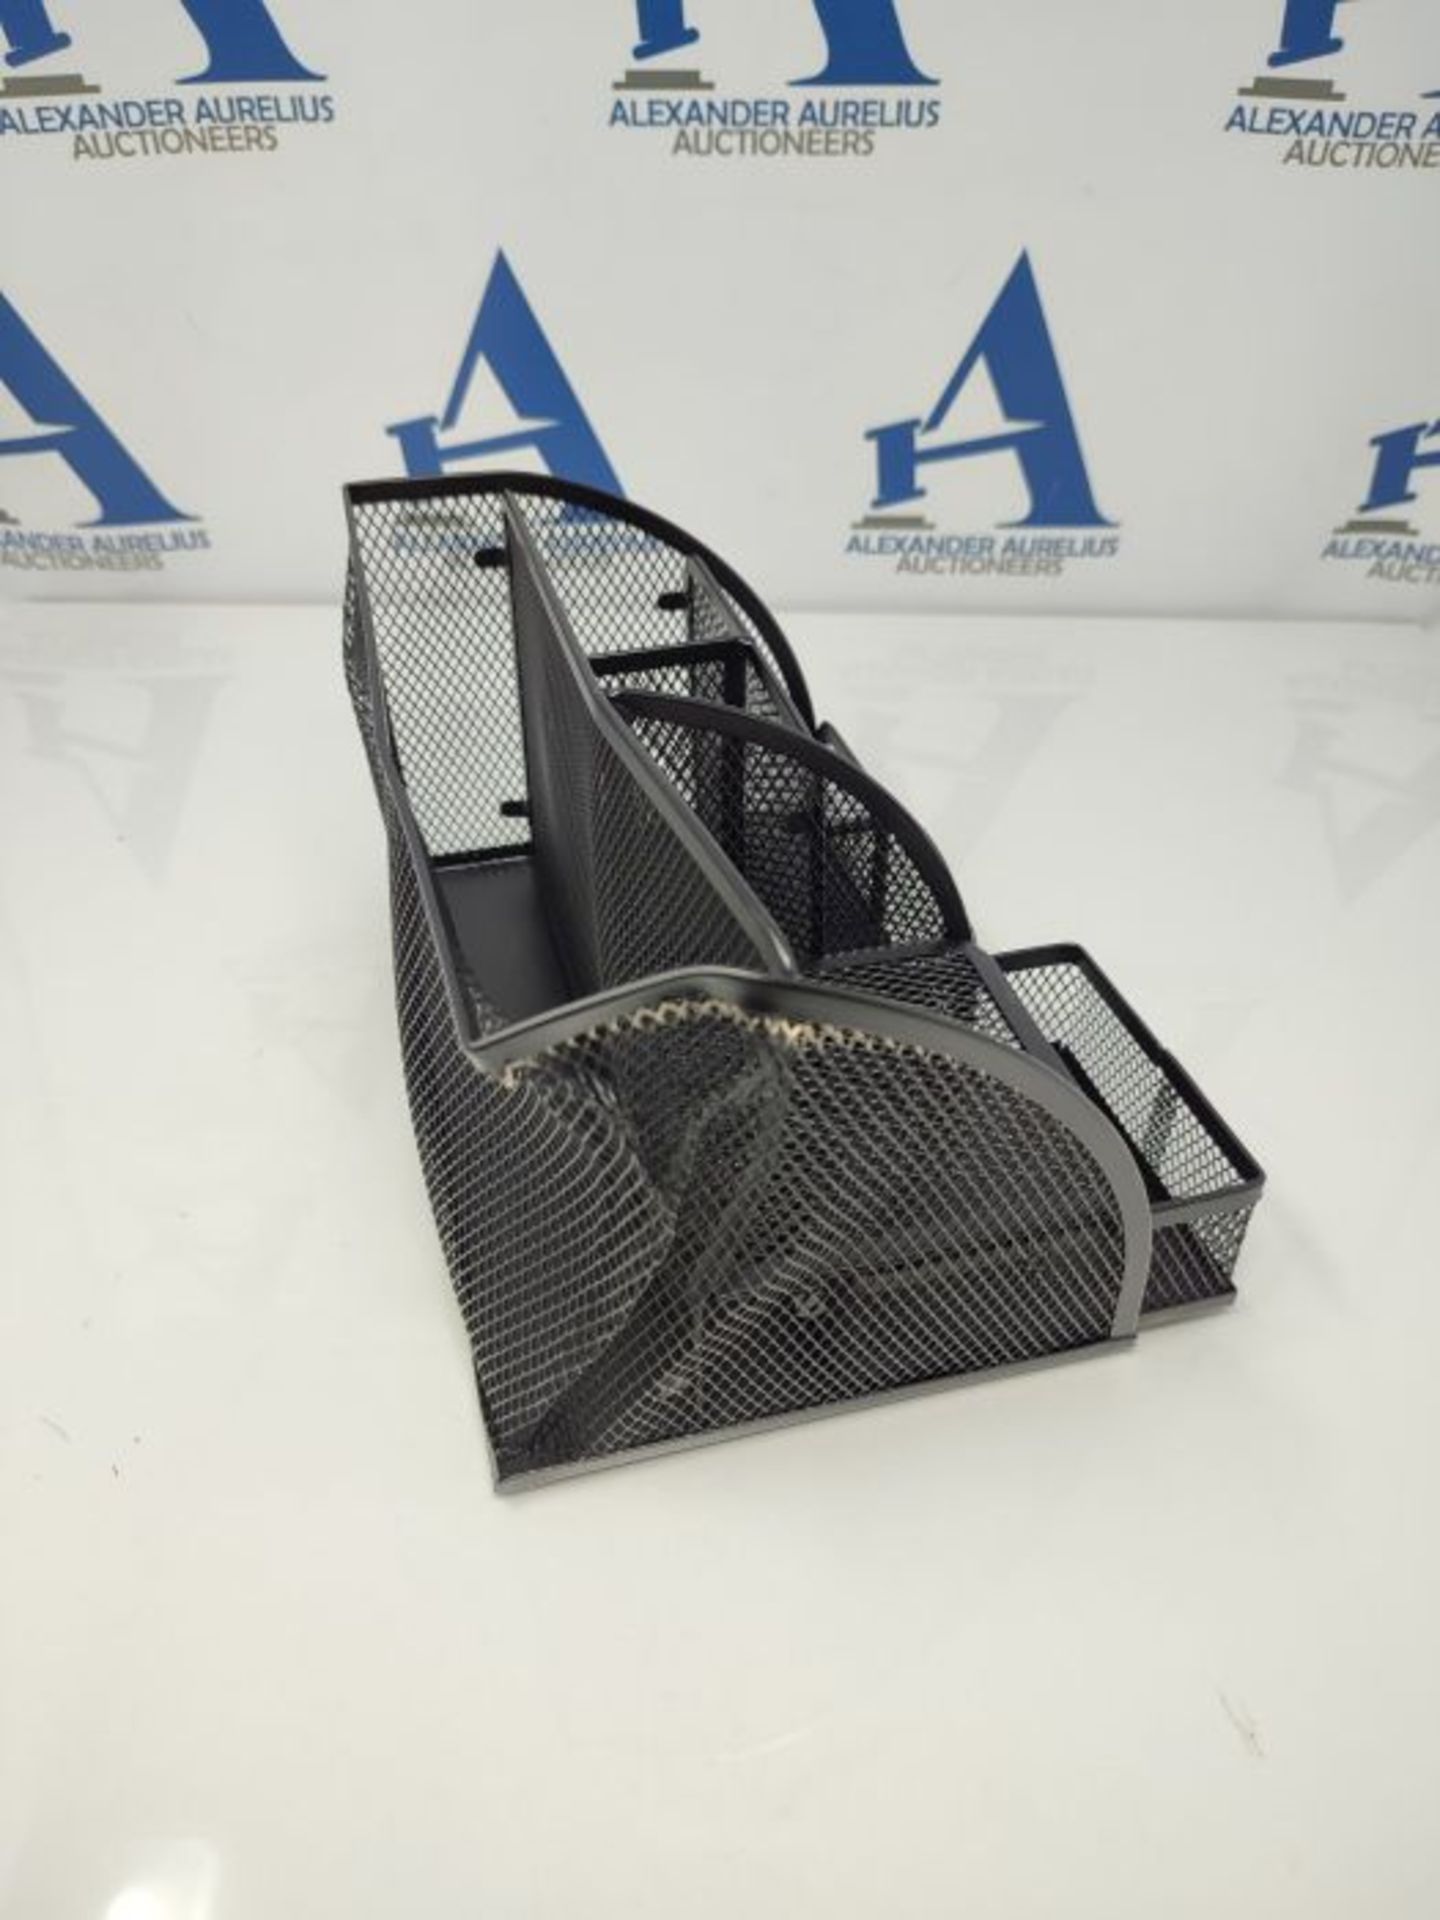 New Office Storage Simple Houseware Mesh Desk Organizer with Sliding Drawer, Five Slot - Image 3 of 3